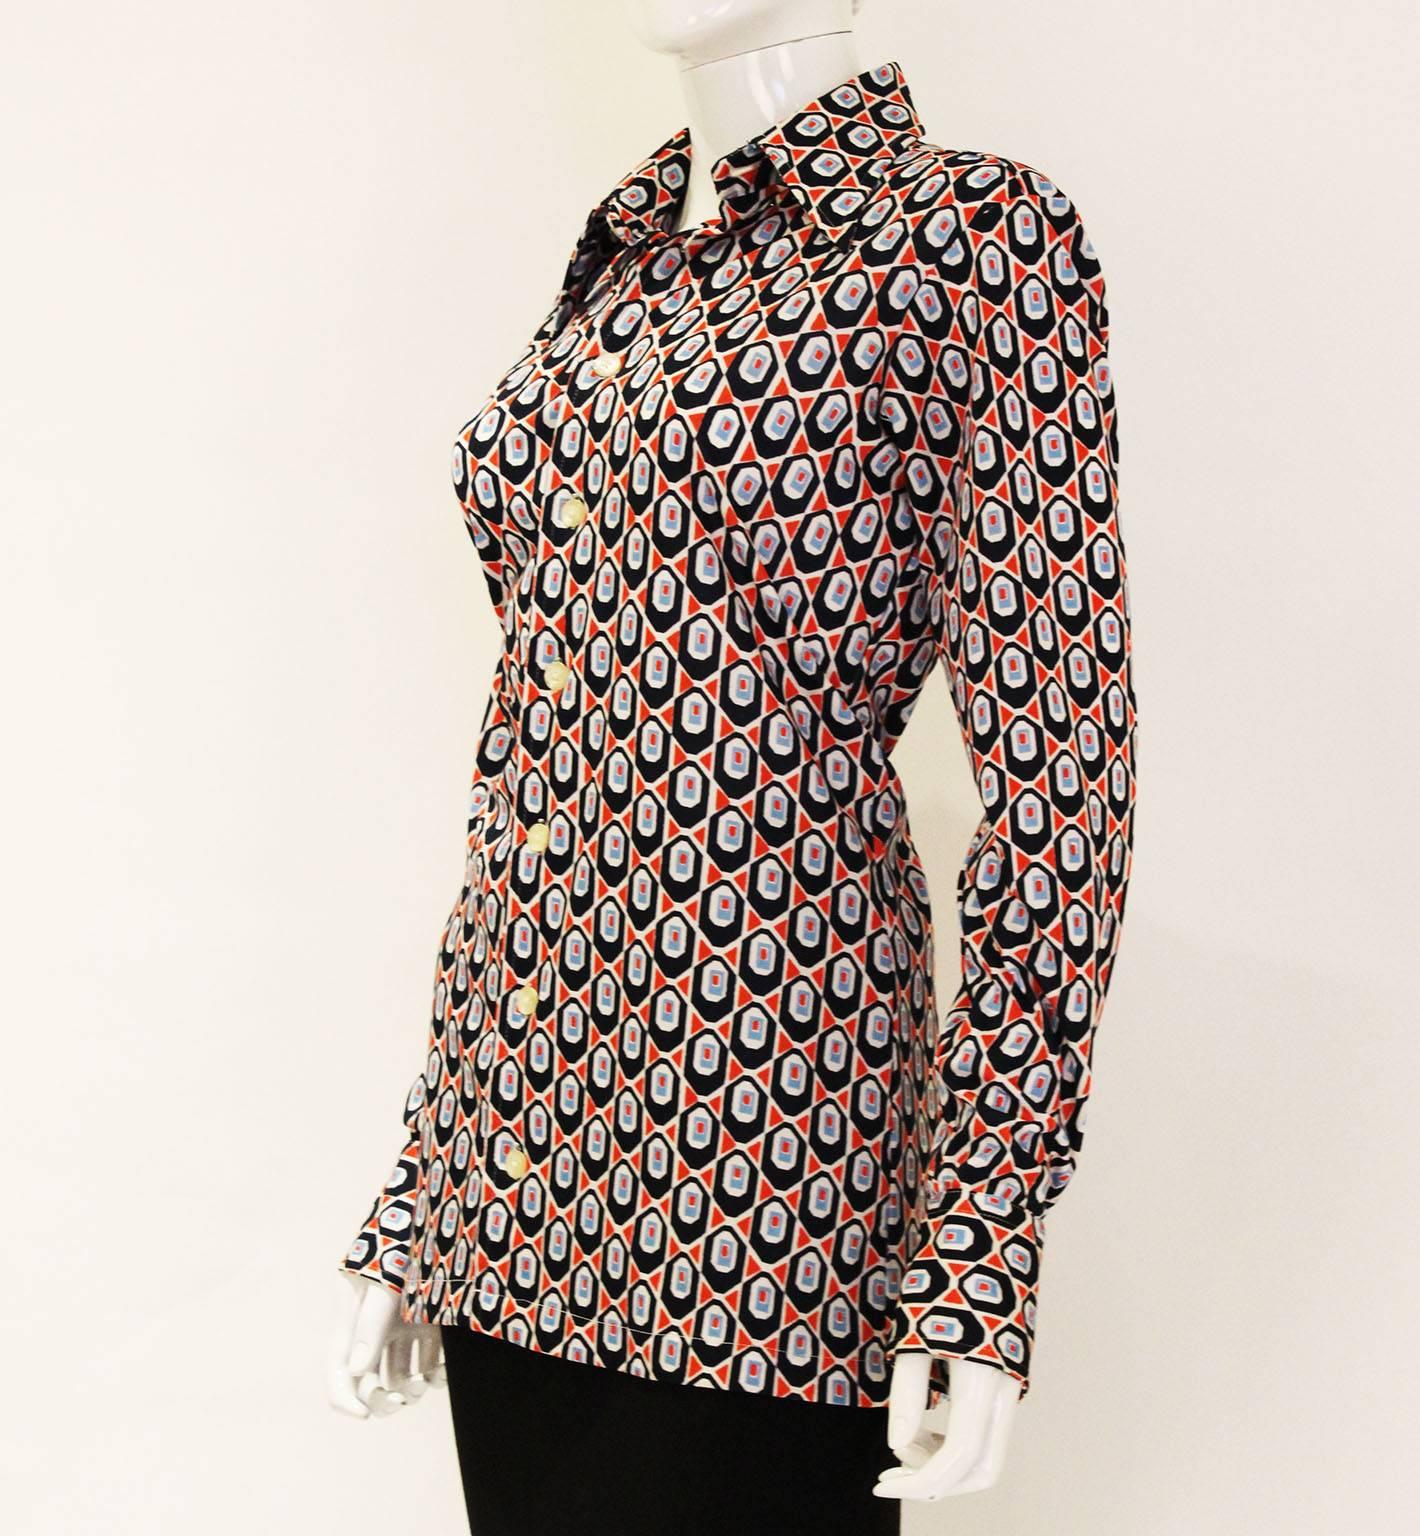 A wonderful groovy  shirt by Givenchy, Gentleman Paris. In a great print,the colours are red,navy blue, sky blue and white.The shirt has a two button cuff and large pointed collar,